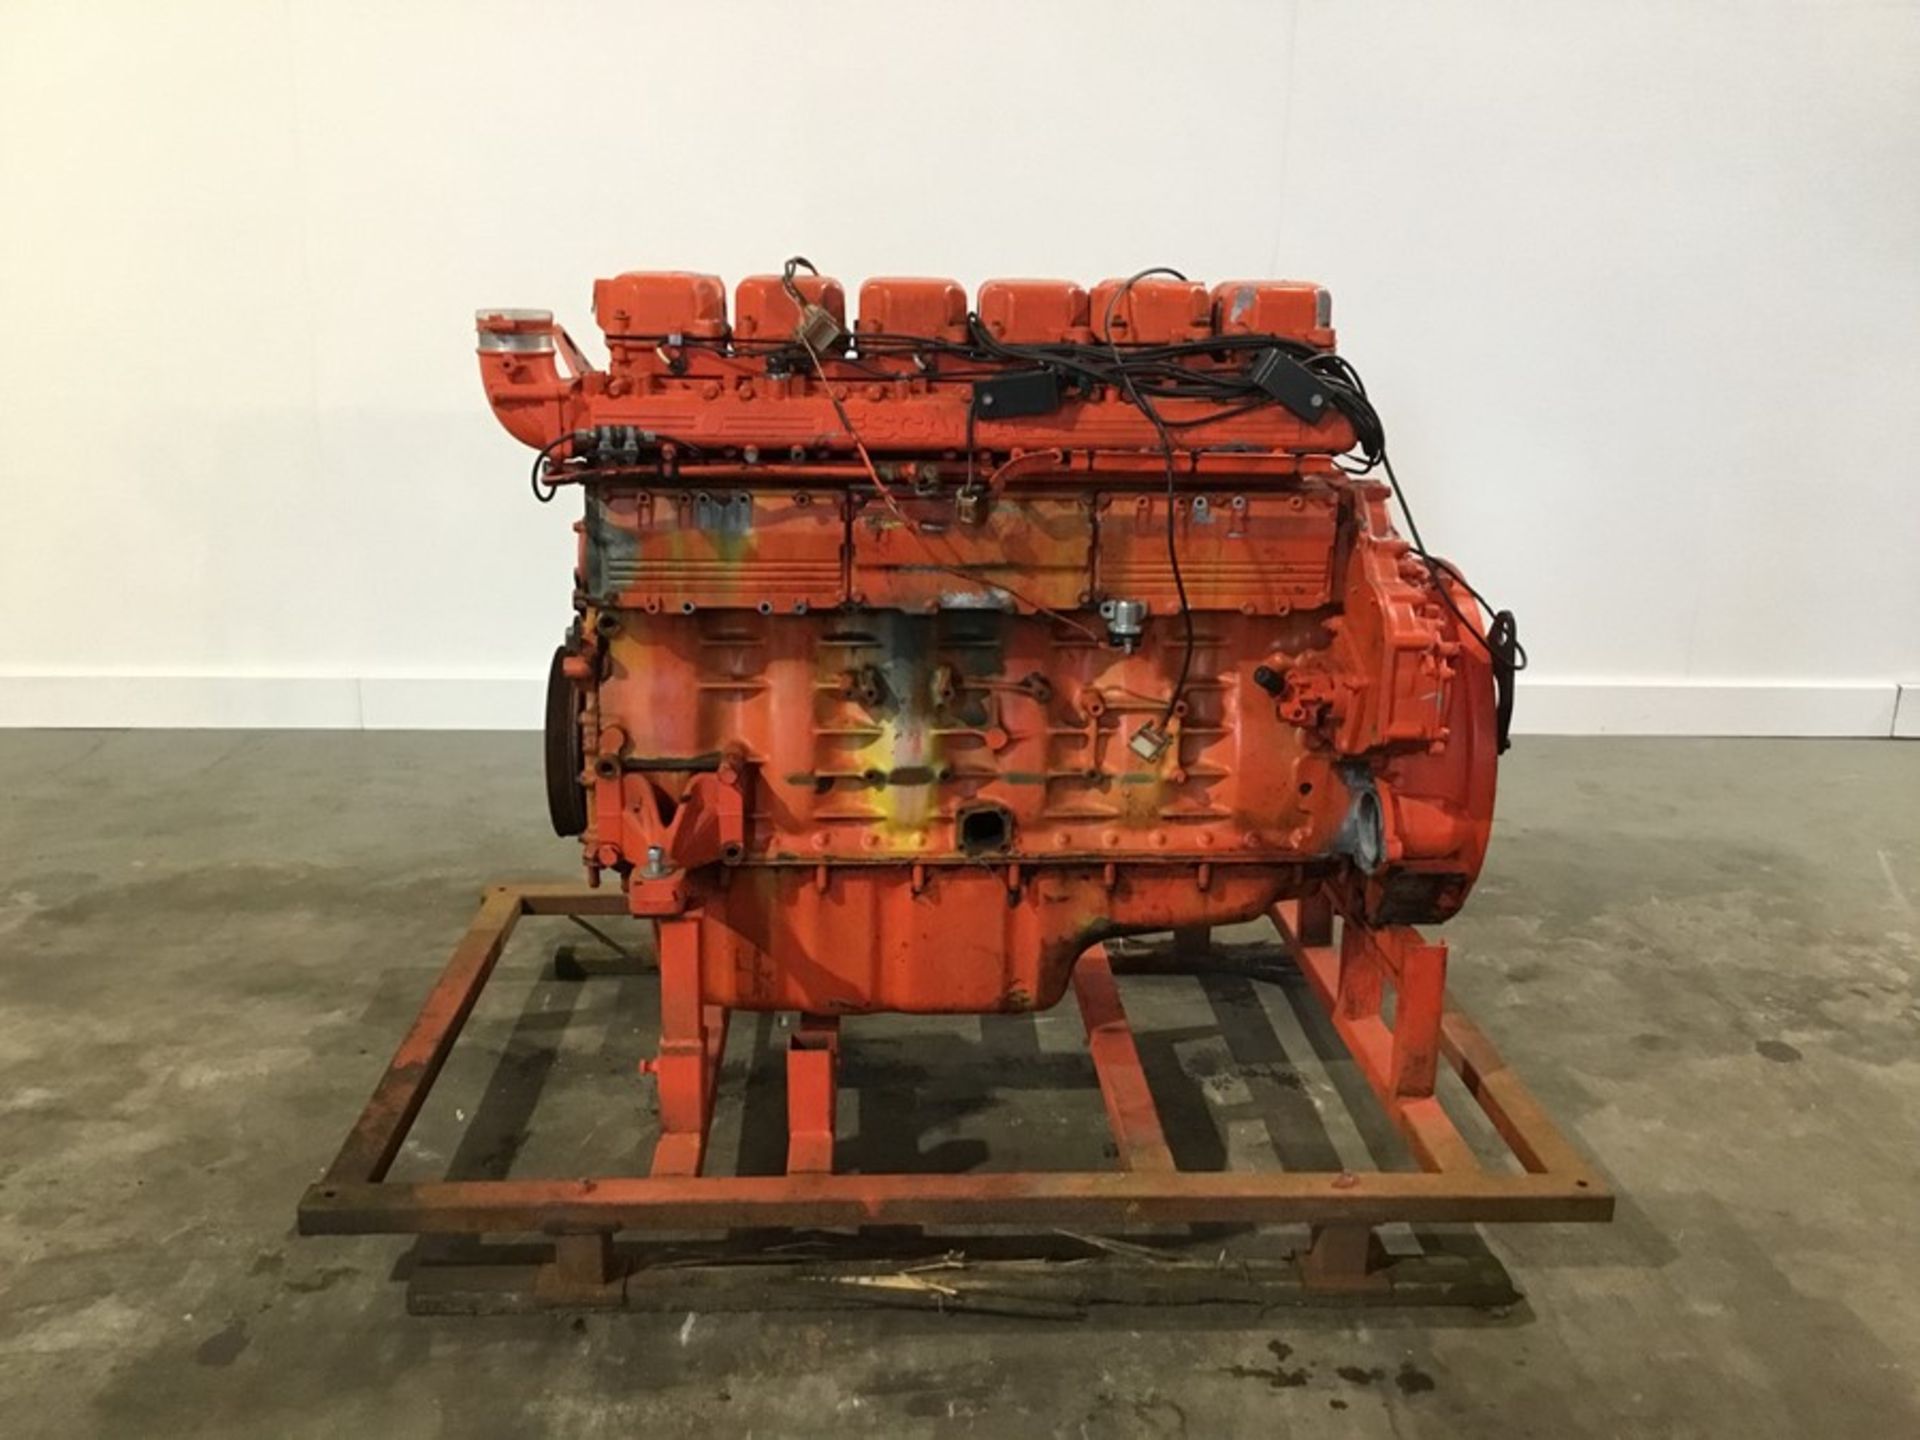 Scania DC 12 52A Diesel engine: Scania DC1252A 6Cyl Serial 6521026 377Kw @1800Rpm Used incomplete - Image 15 of 21